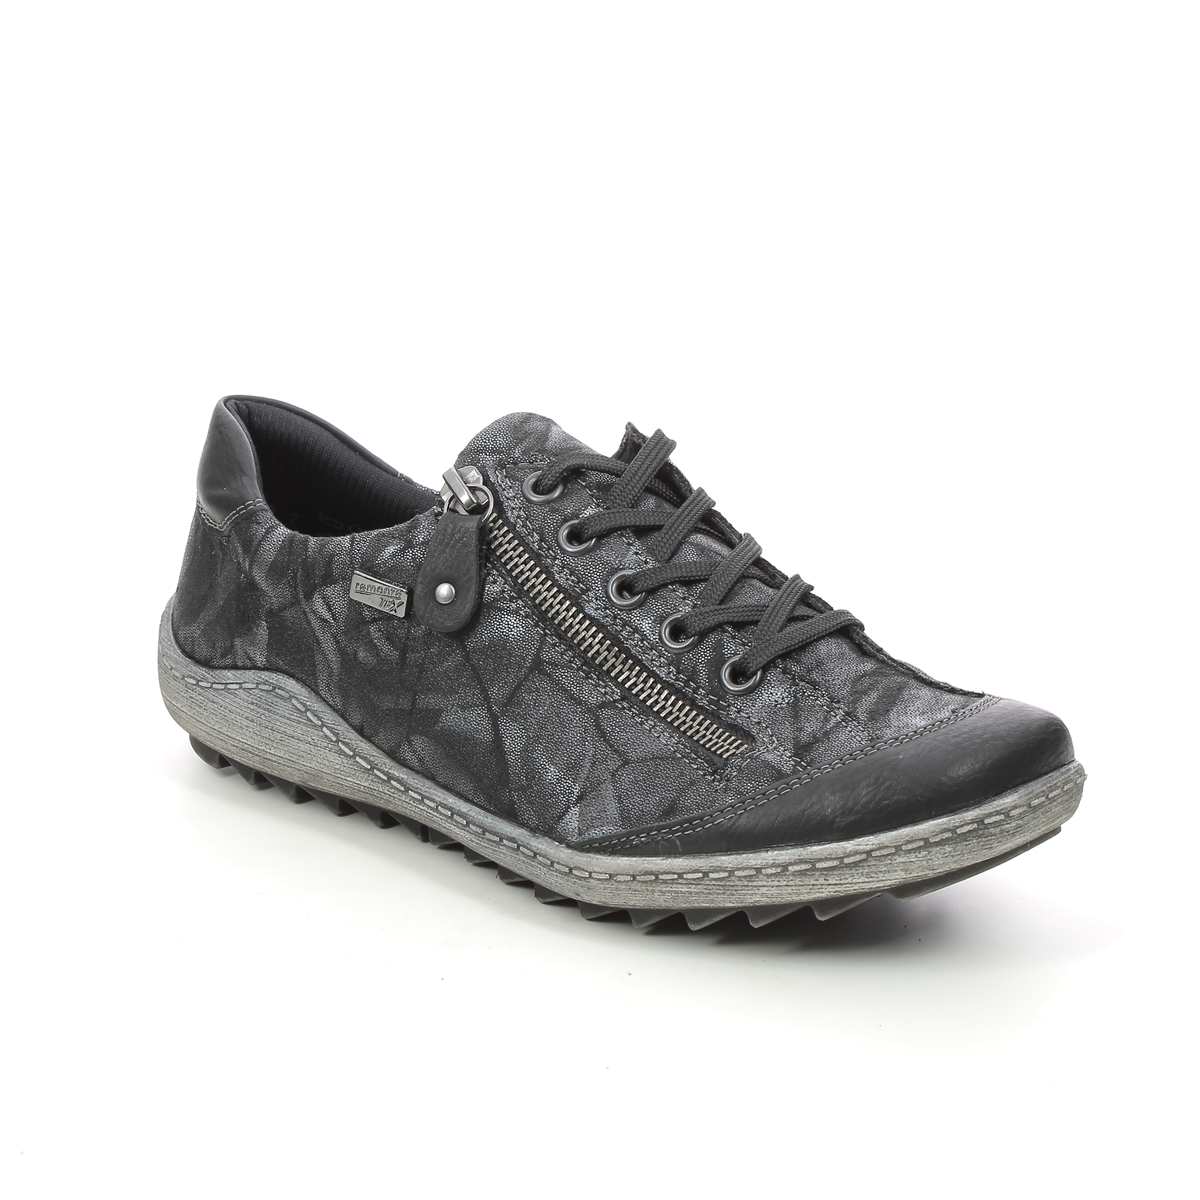 Remonte Zigzip 85 Tex Black Grey Womens Lacing Shoes R1402-05 In Size 39 In Plain Black Grey